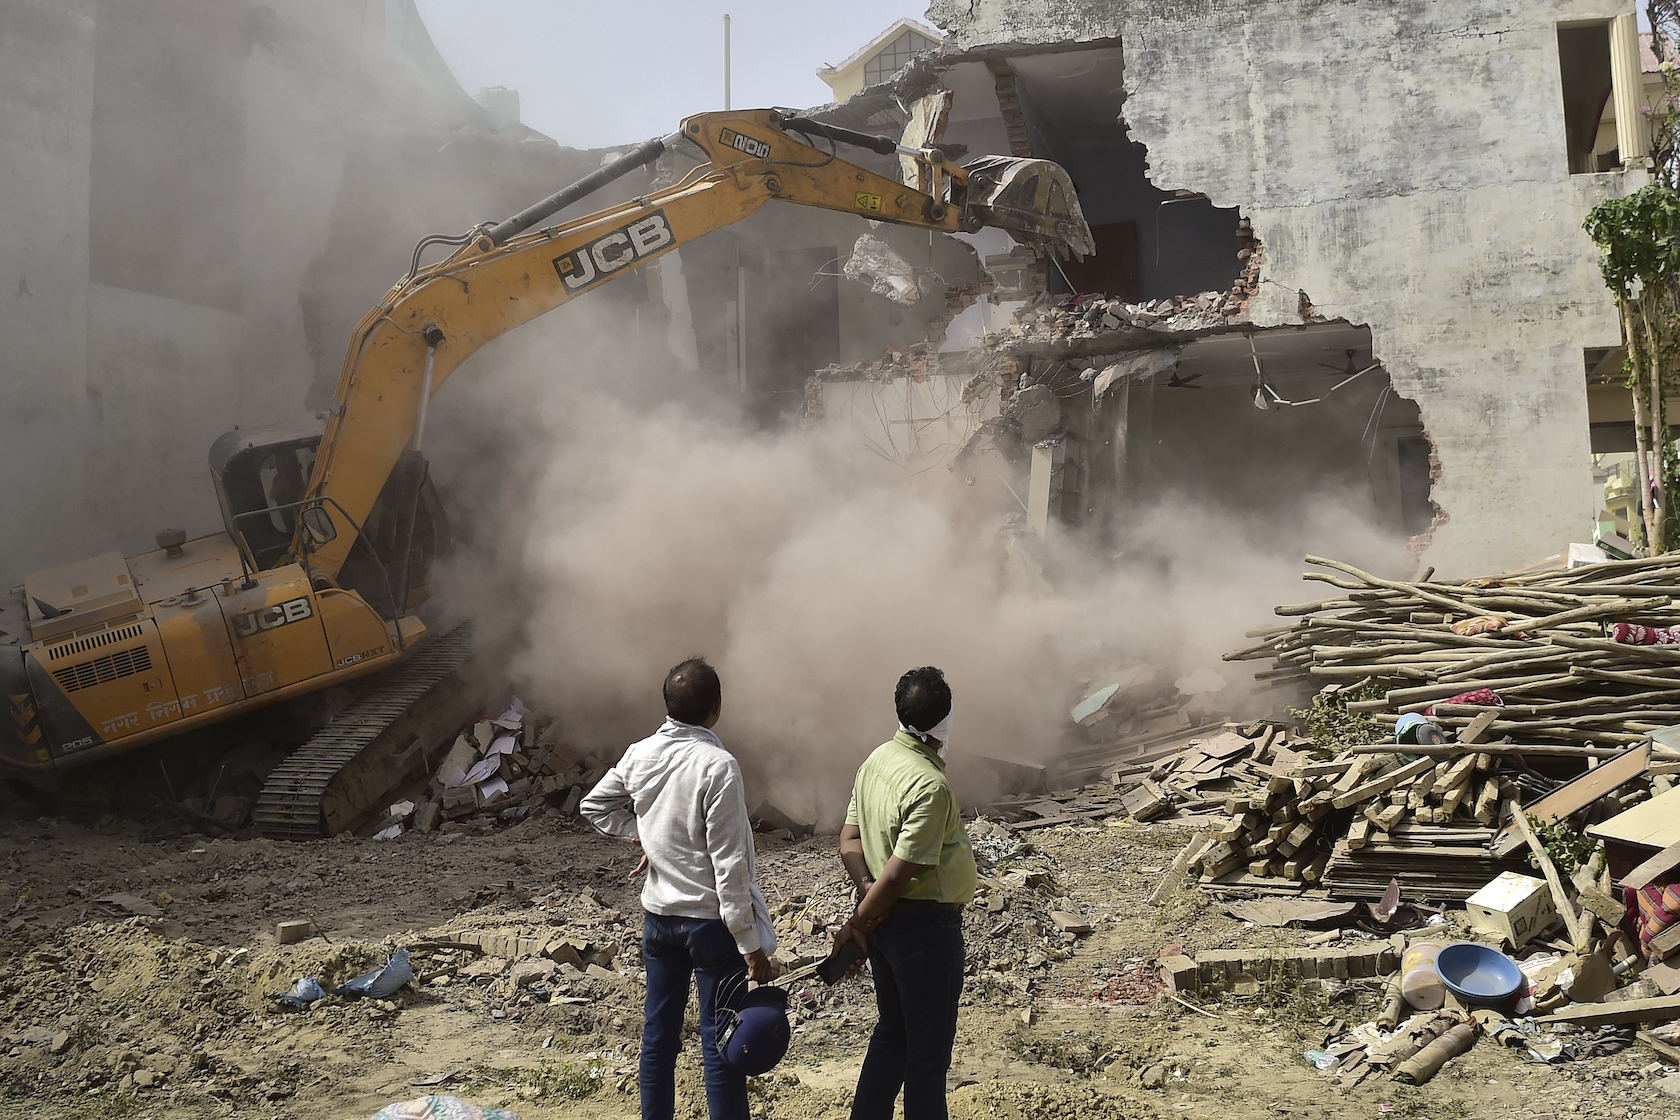 A bulldozer demolishes the house of Javed Mohammad in India after authorities accused him of taking part in protests in June 2022 [AFP]